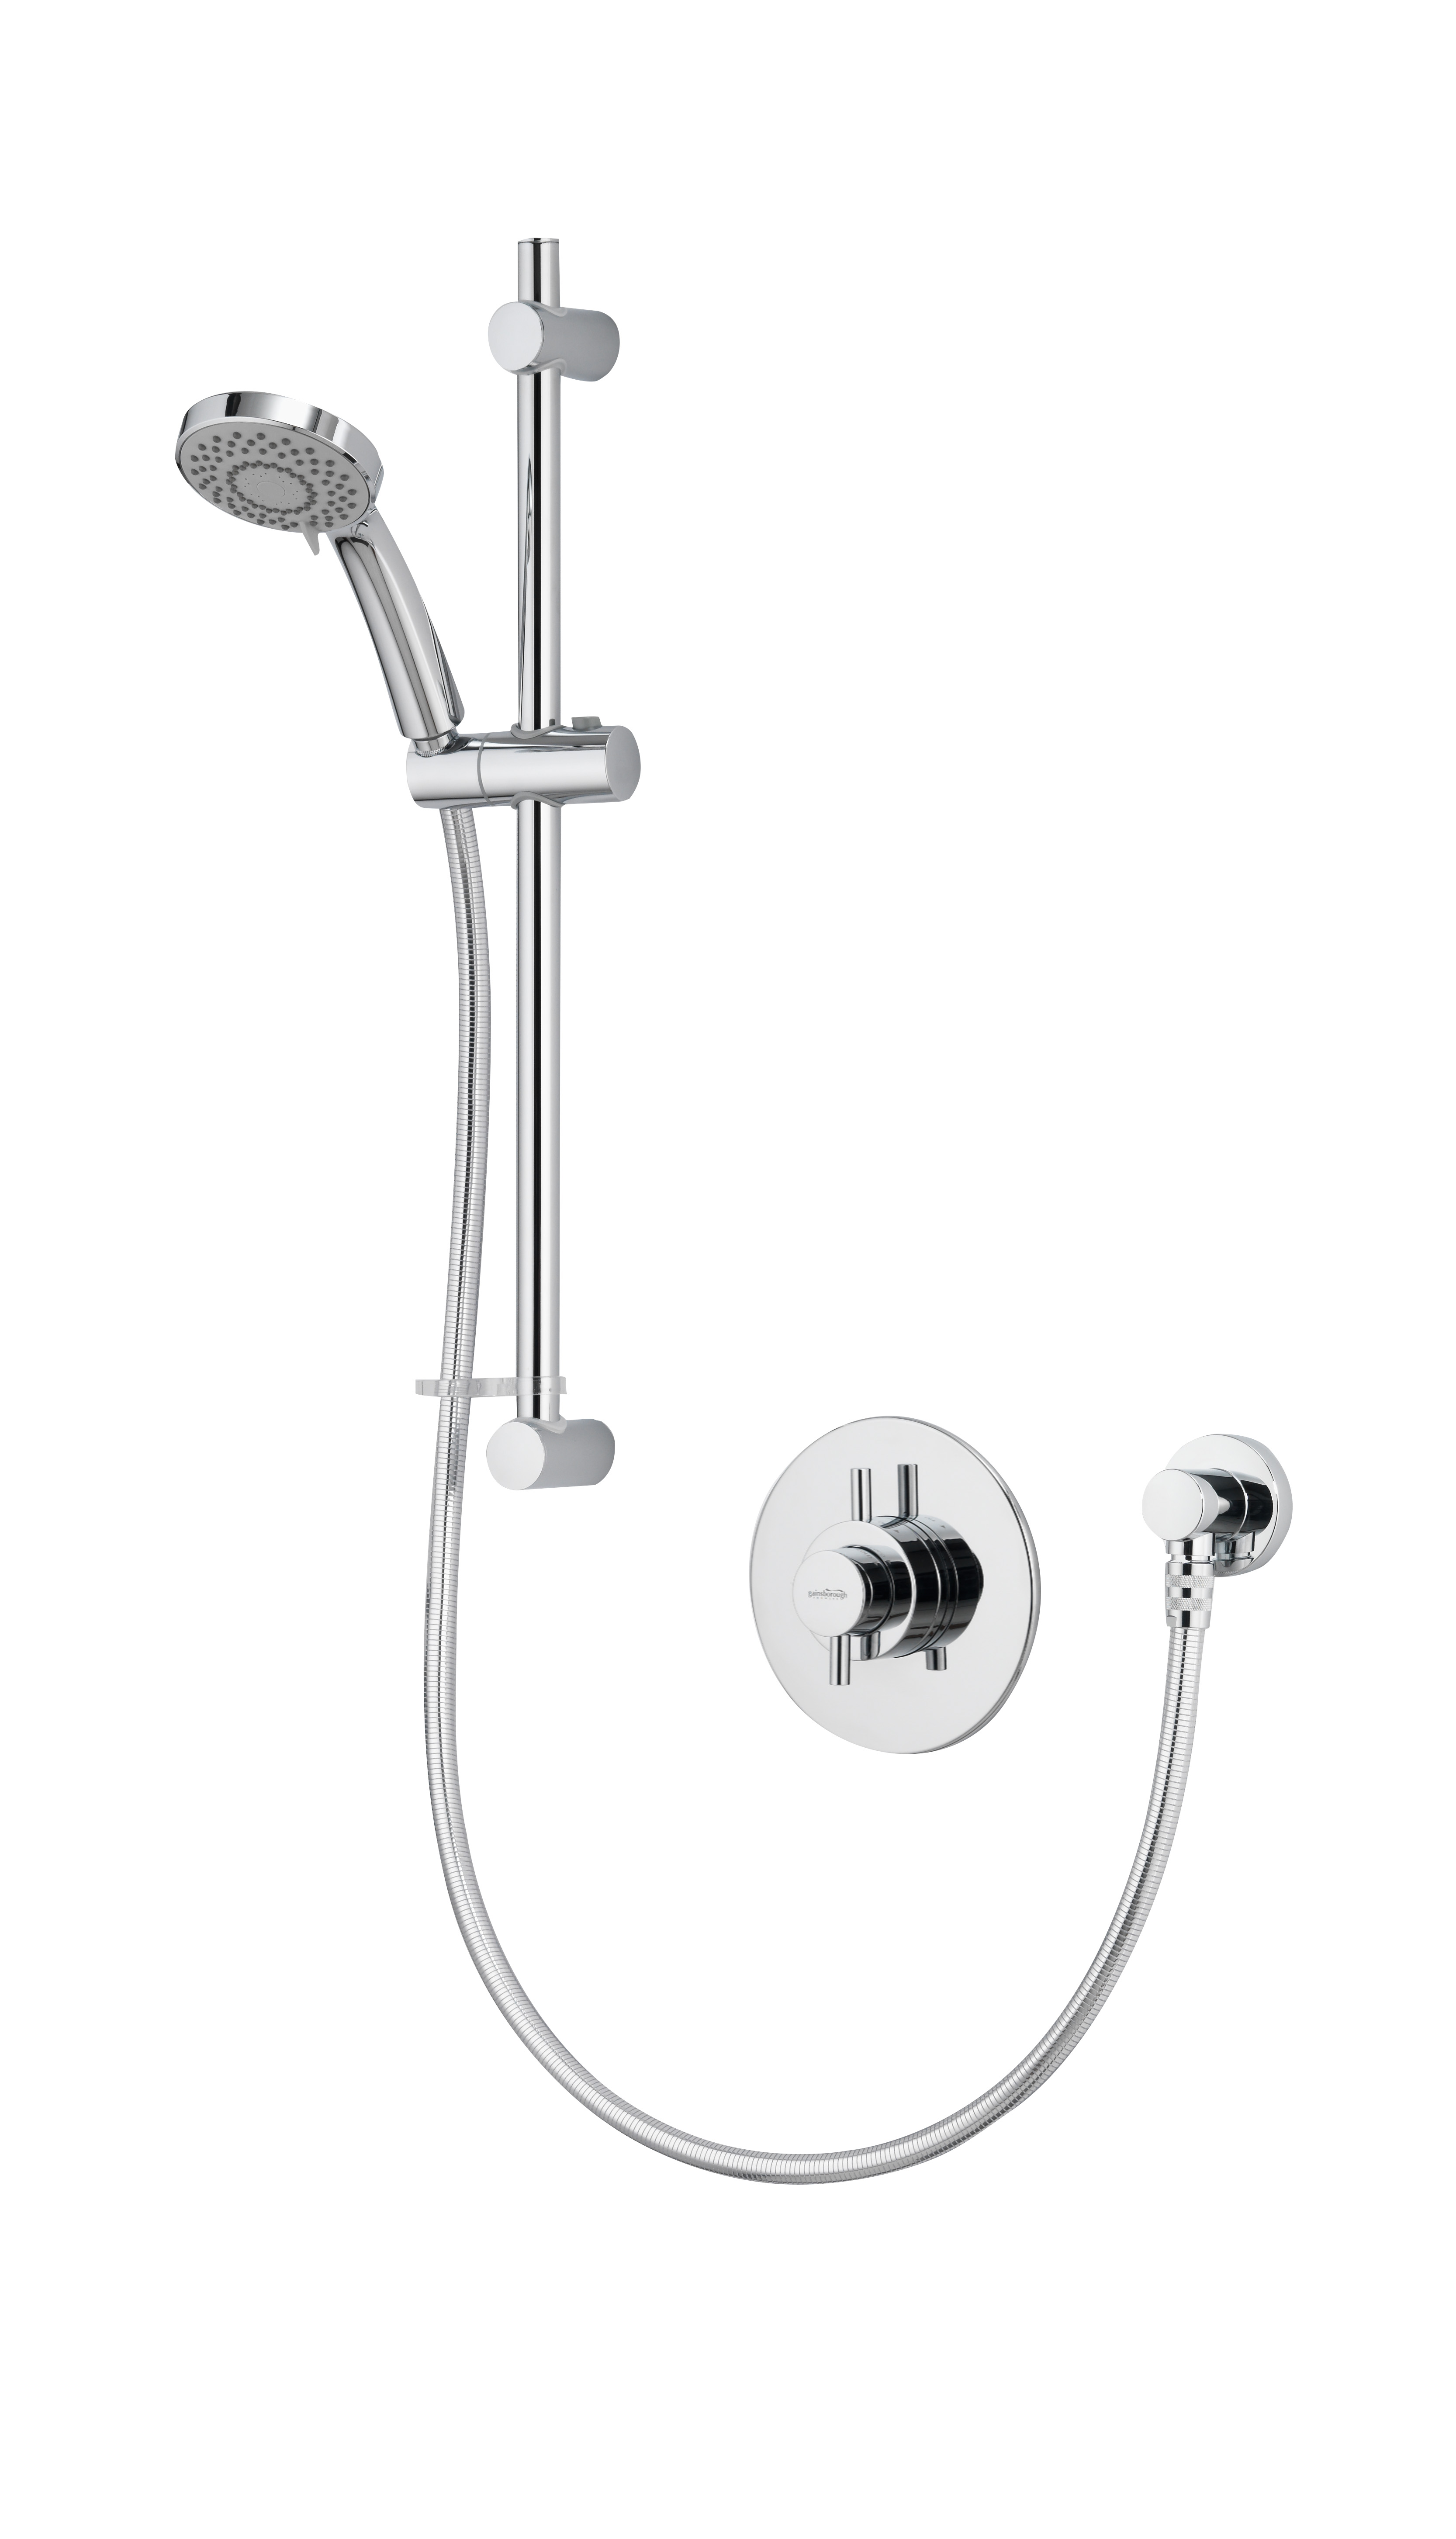 GT650 Concealed Mixer Shower - save 20% until 16th January 2014, now just £159.99